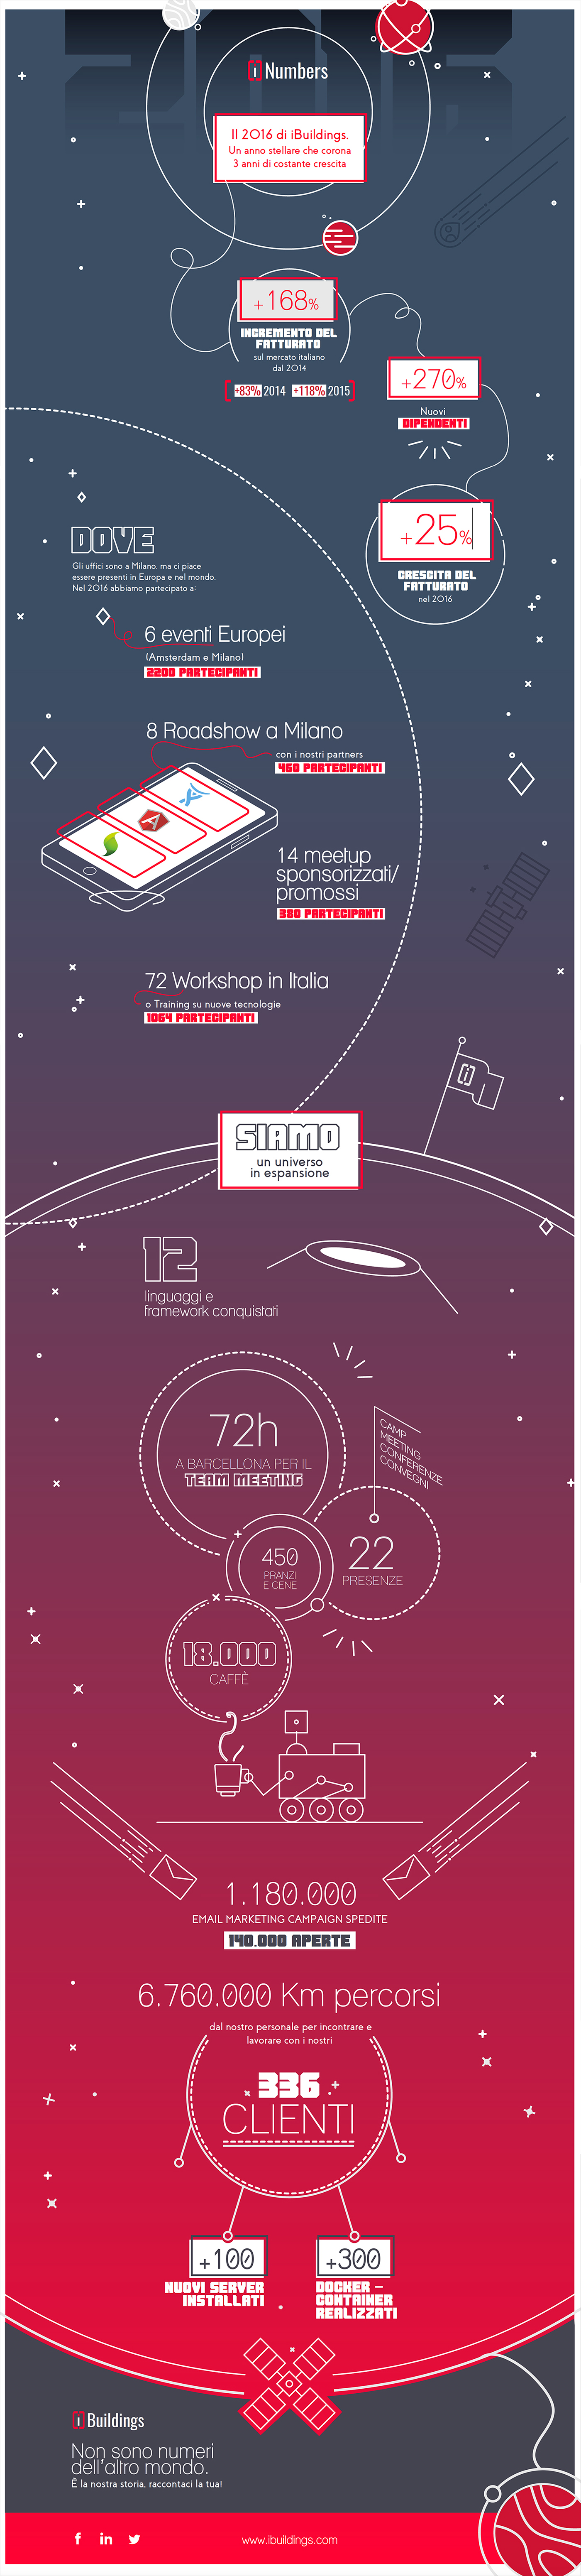 infographic numbers Space  planet growth ILLUSTRATION  graphic design  Project